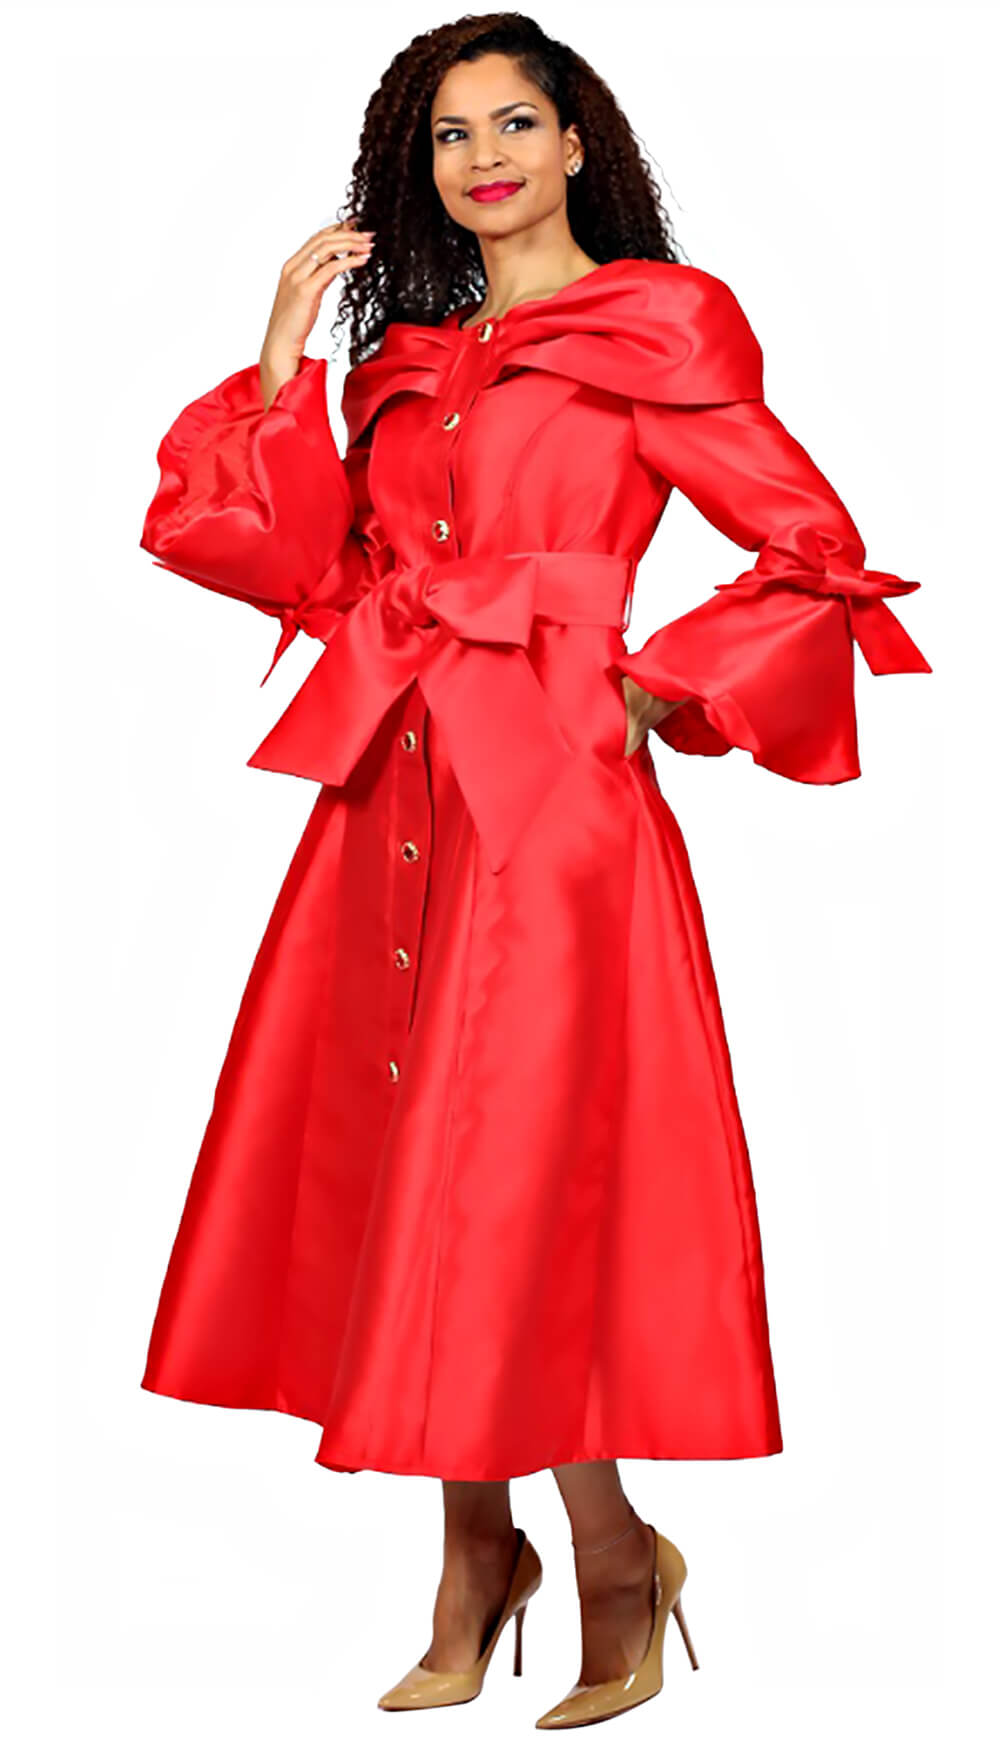 Diana Church Robe 8707-Red - Church Suits For Less